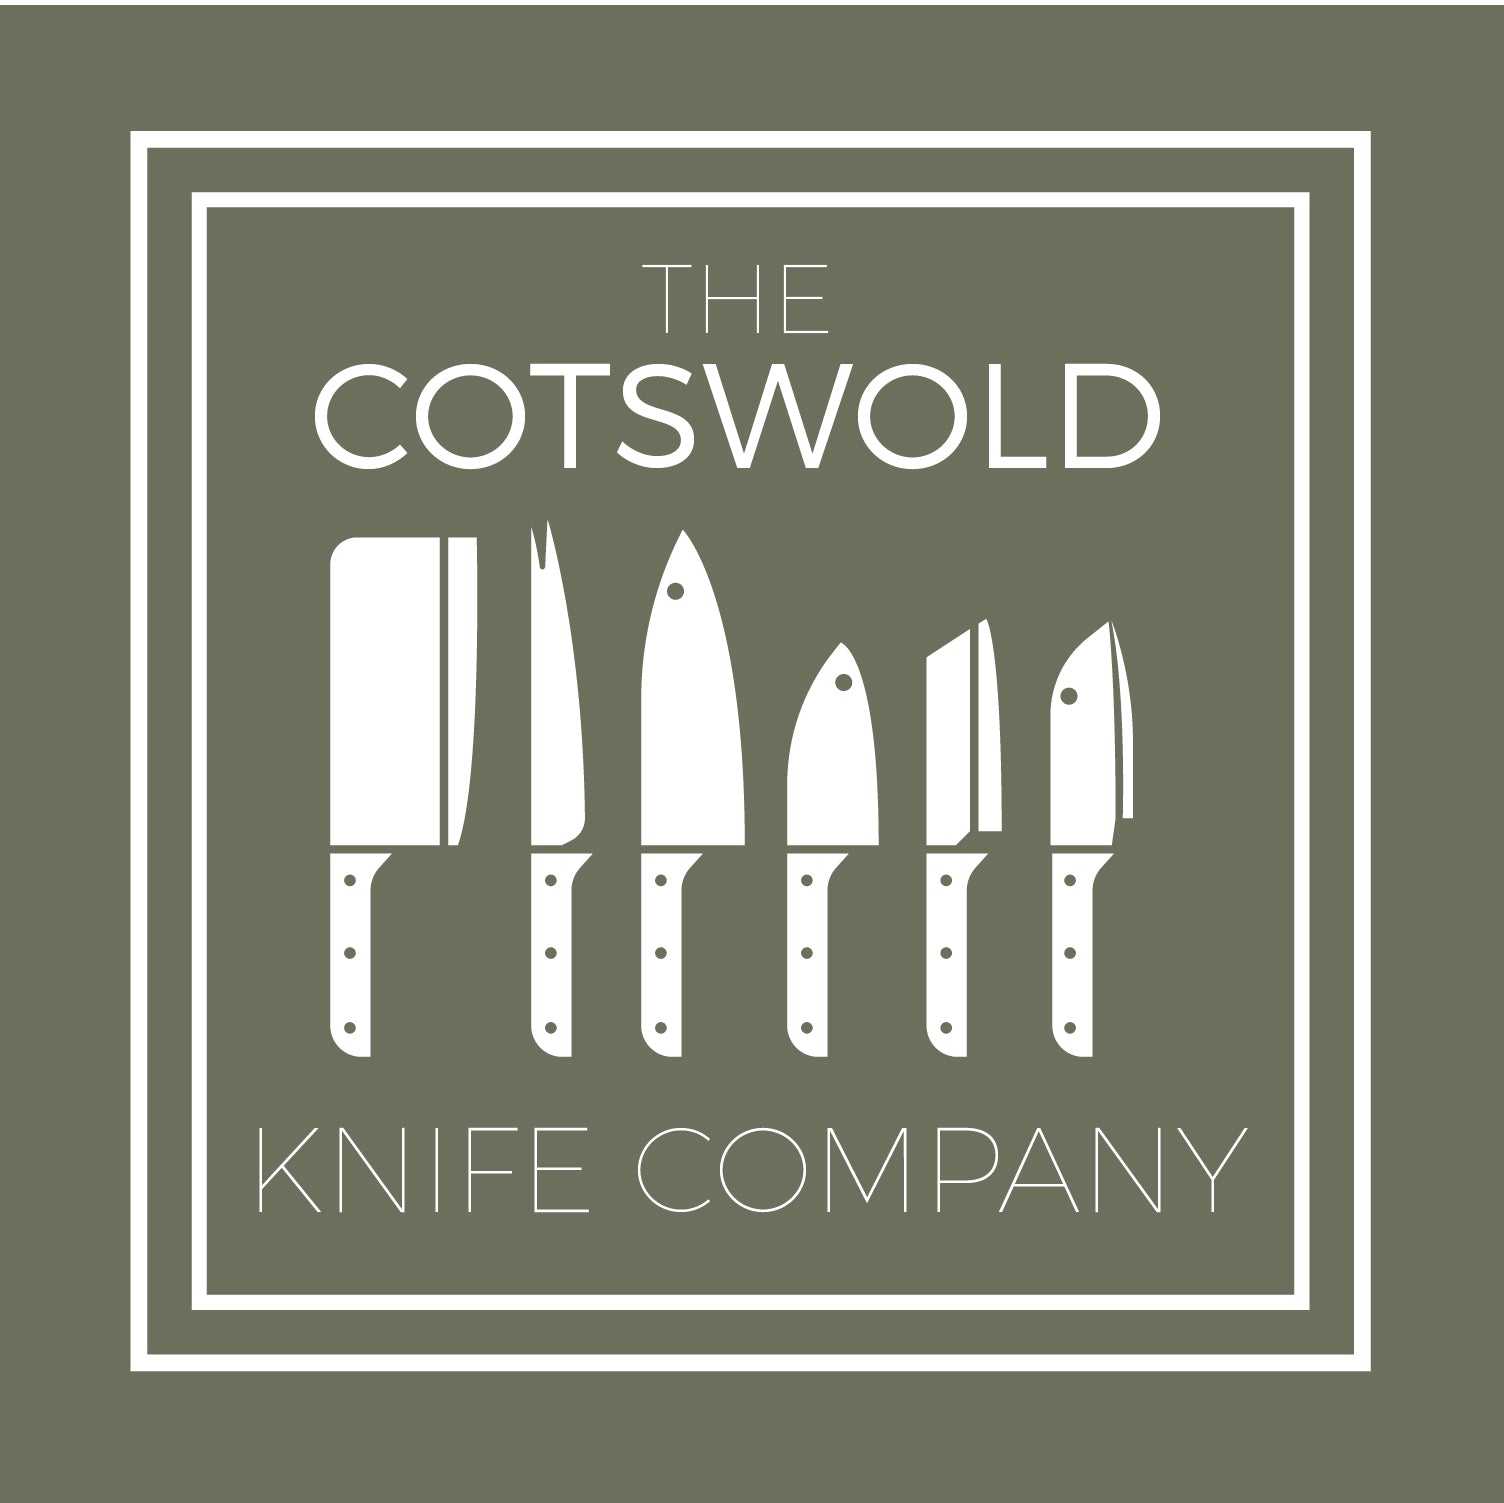 We have lift off. - The Cotswold Knife Company